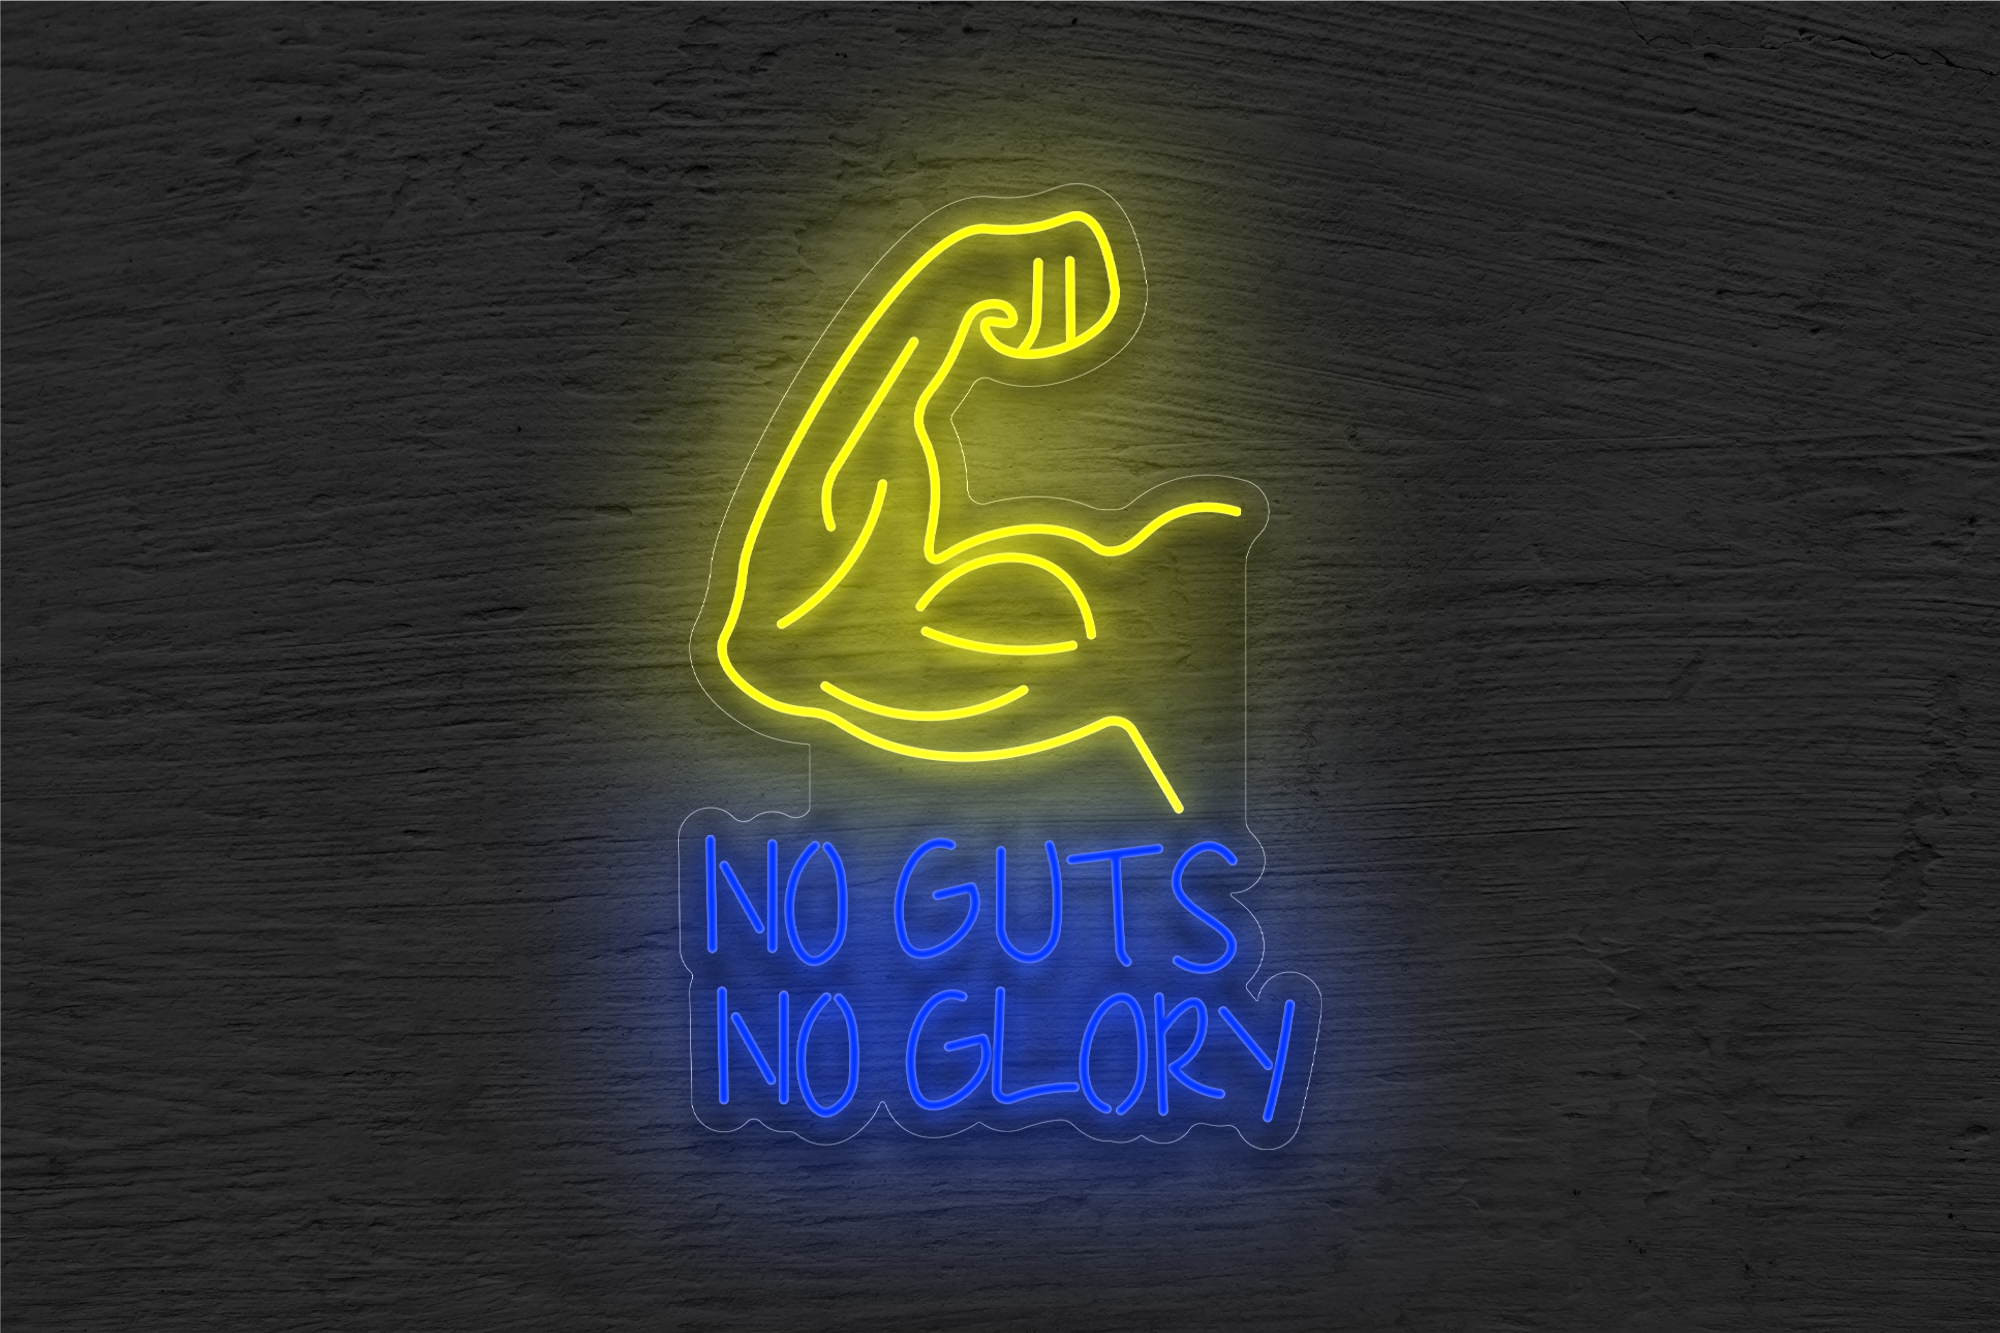 "No Guts, No Glory" with Muscles LED Neon Sign